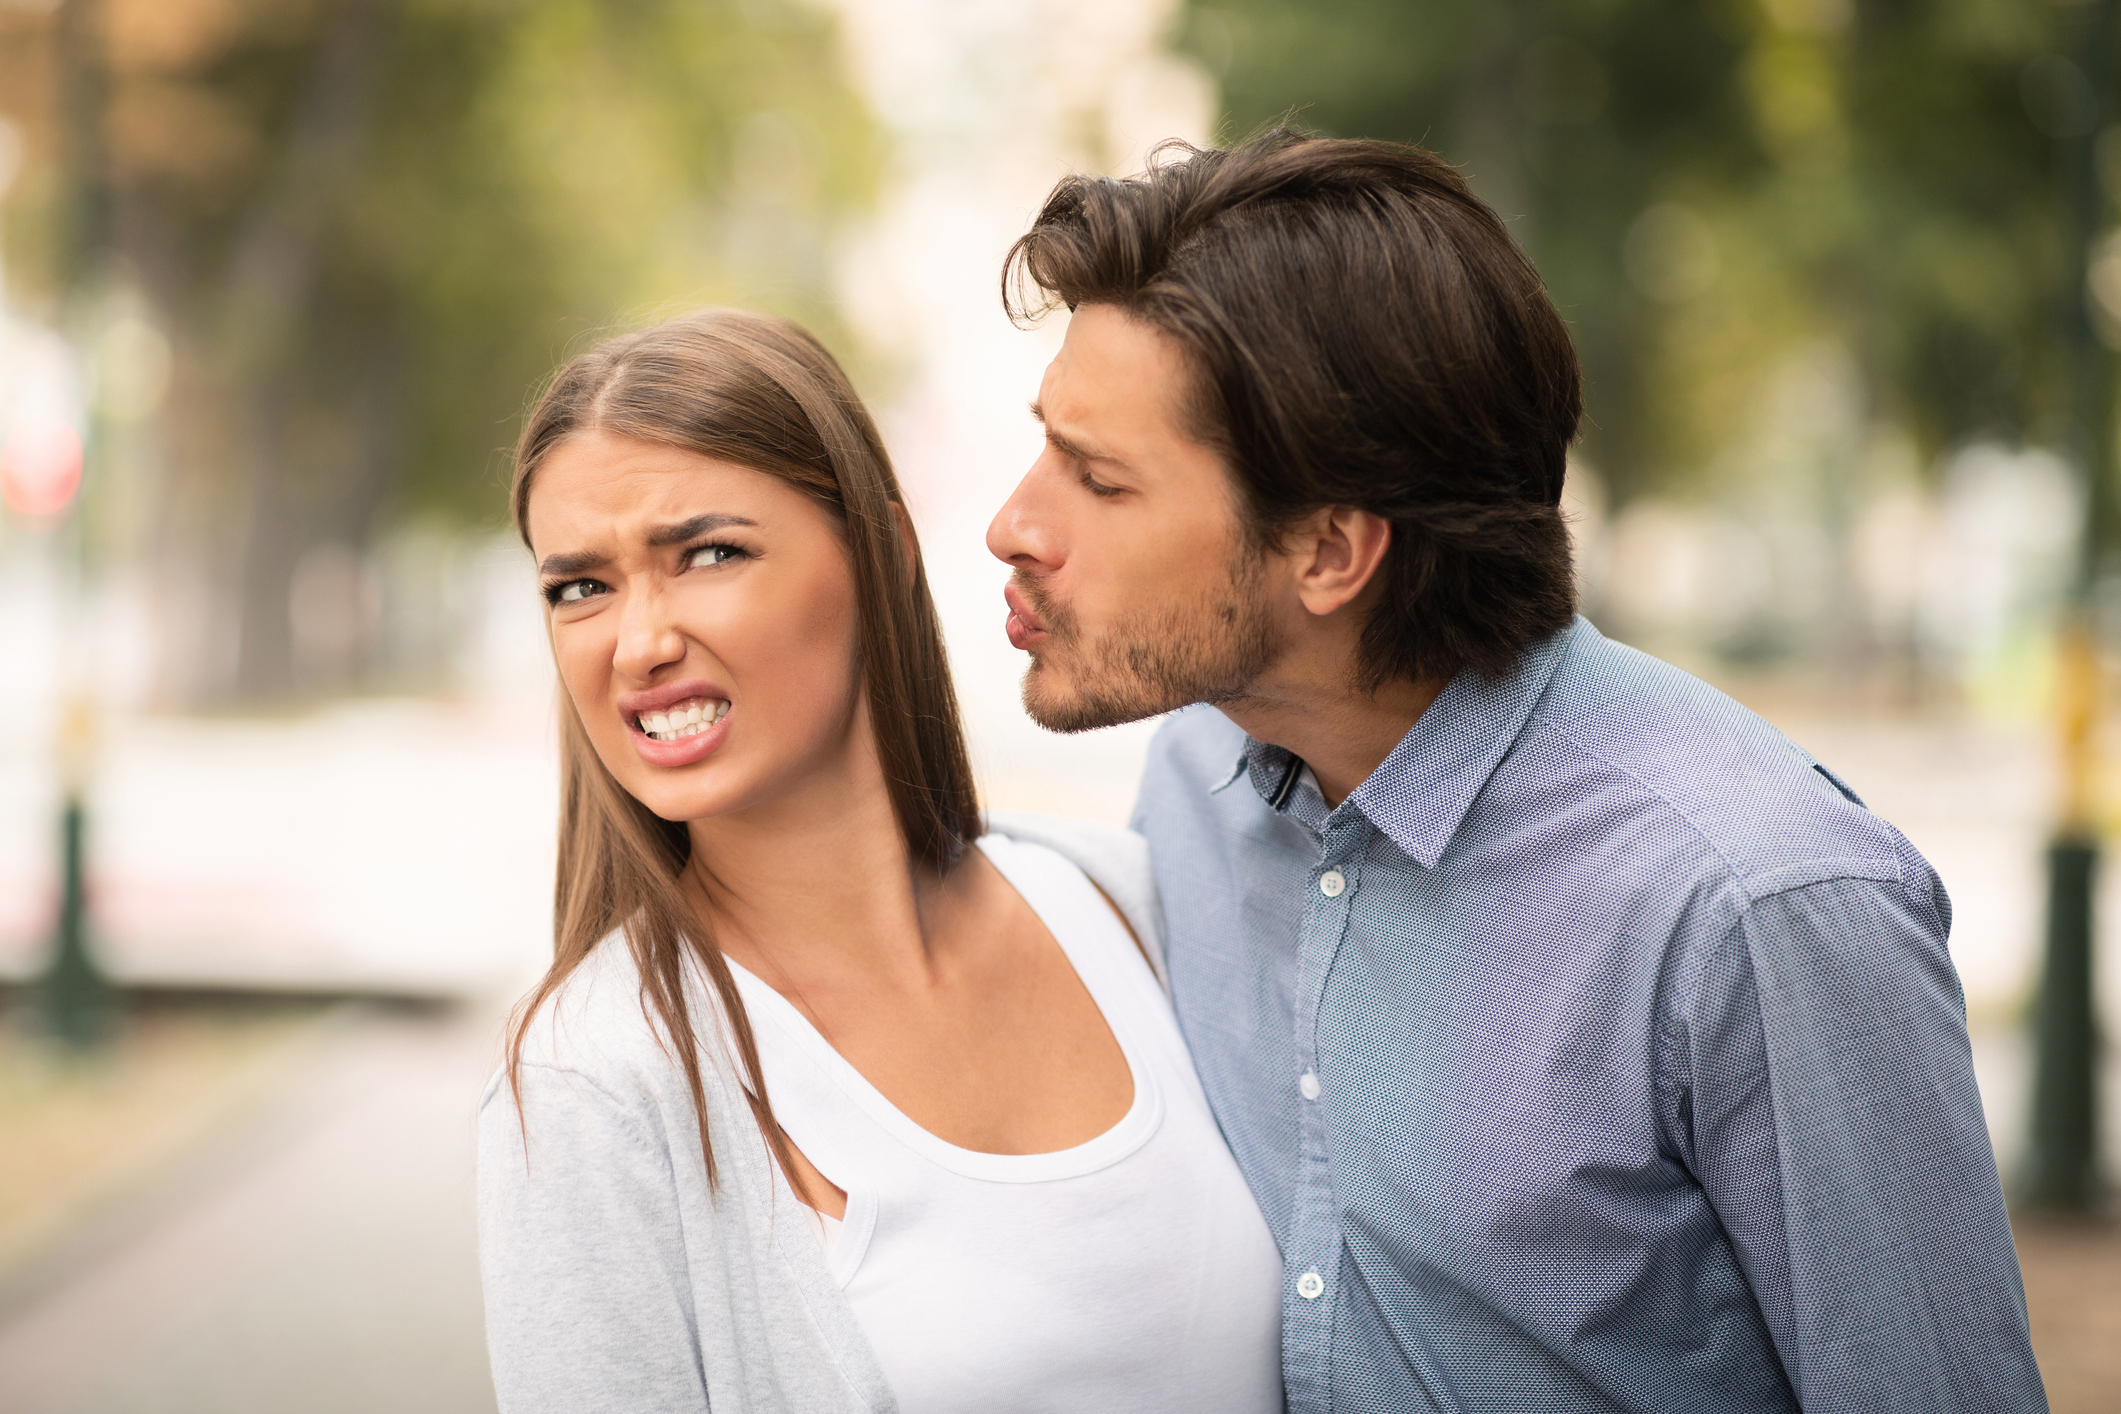 Red Flags To Look Out For When Youre Dating Someone New